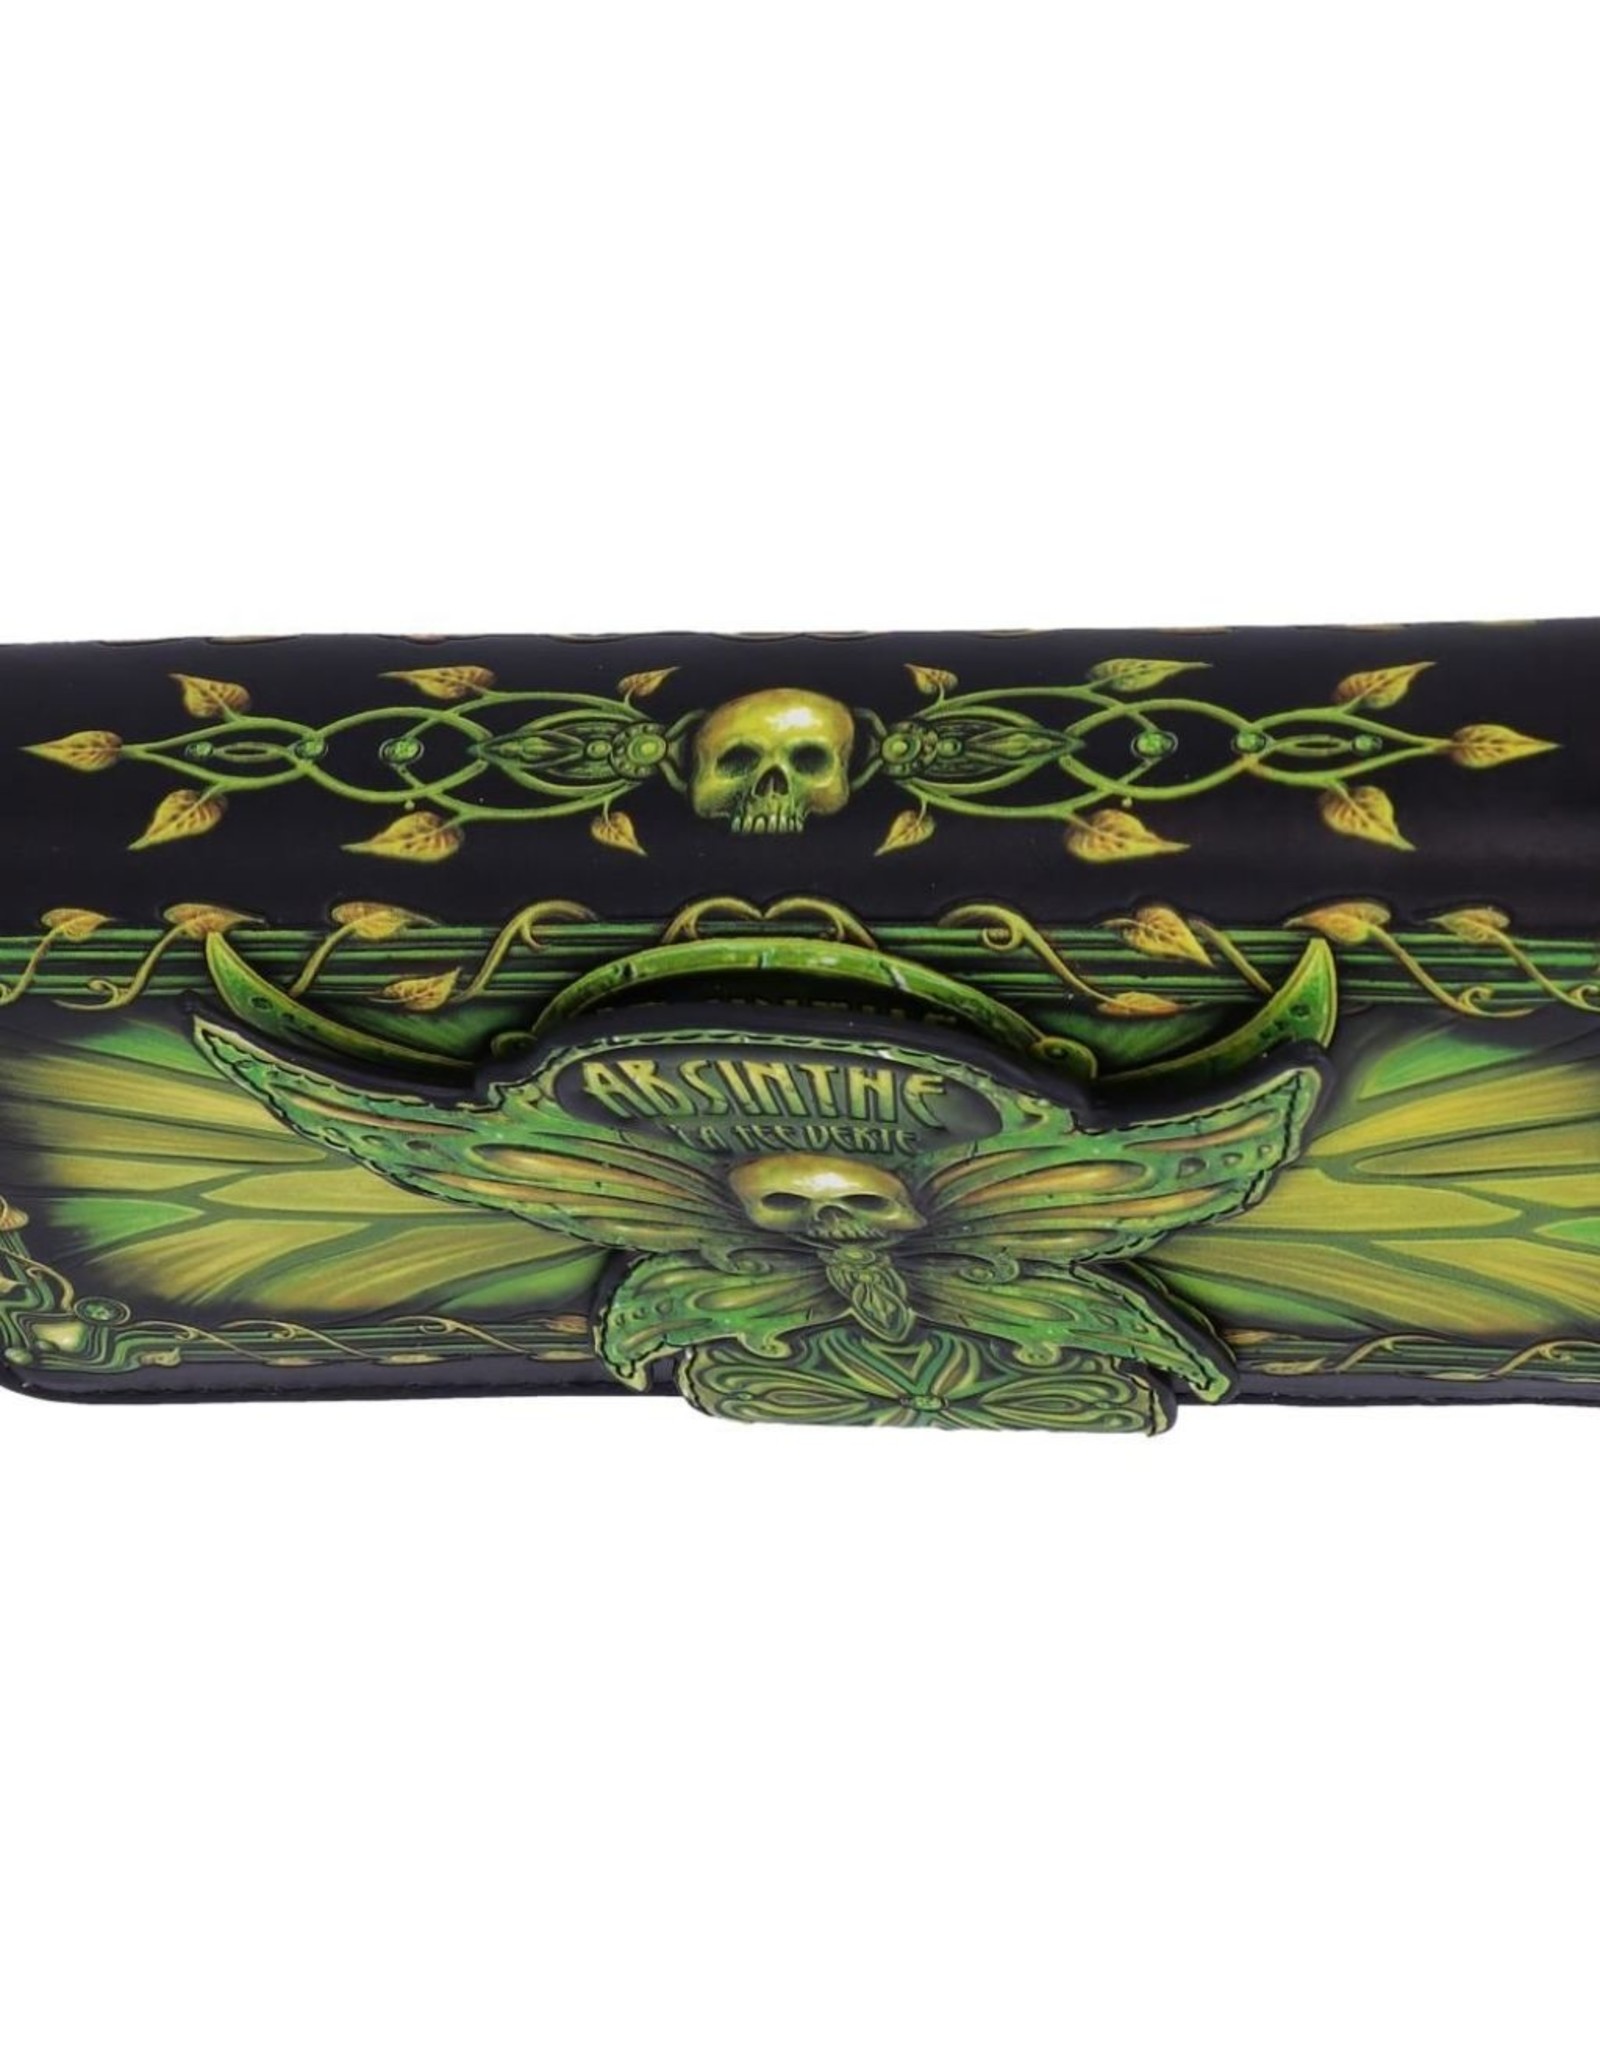 Nemesis Now Gothic wallets and purses - Absinthe La Fee Verte Green Fairy Embossed Purse Nemesis Now